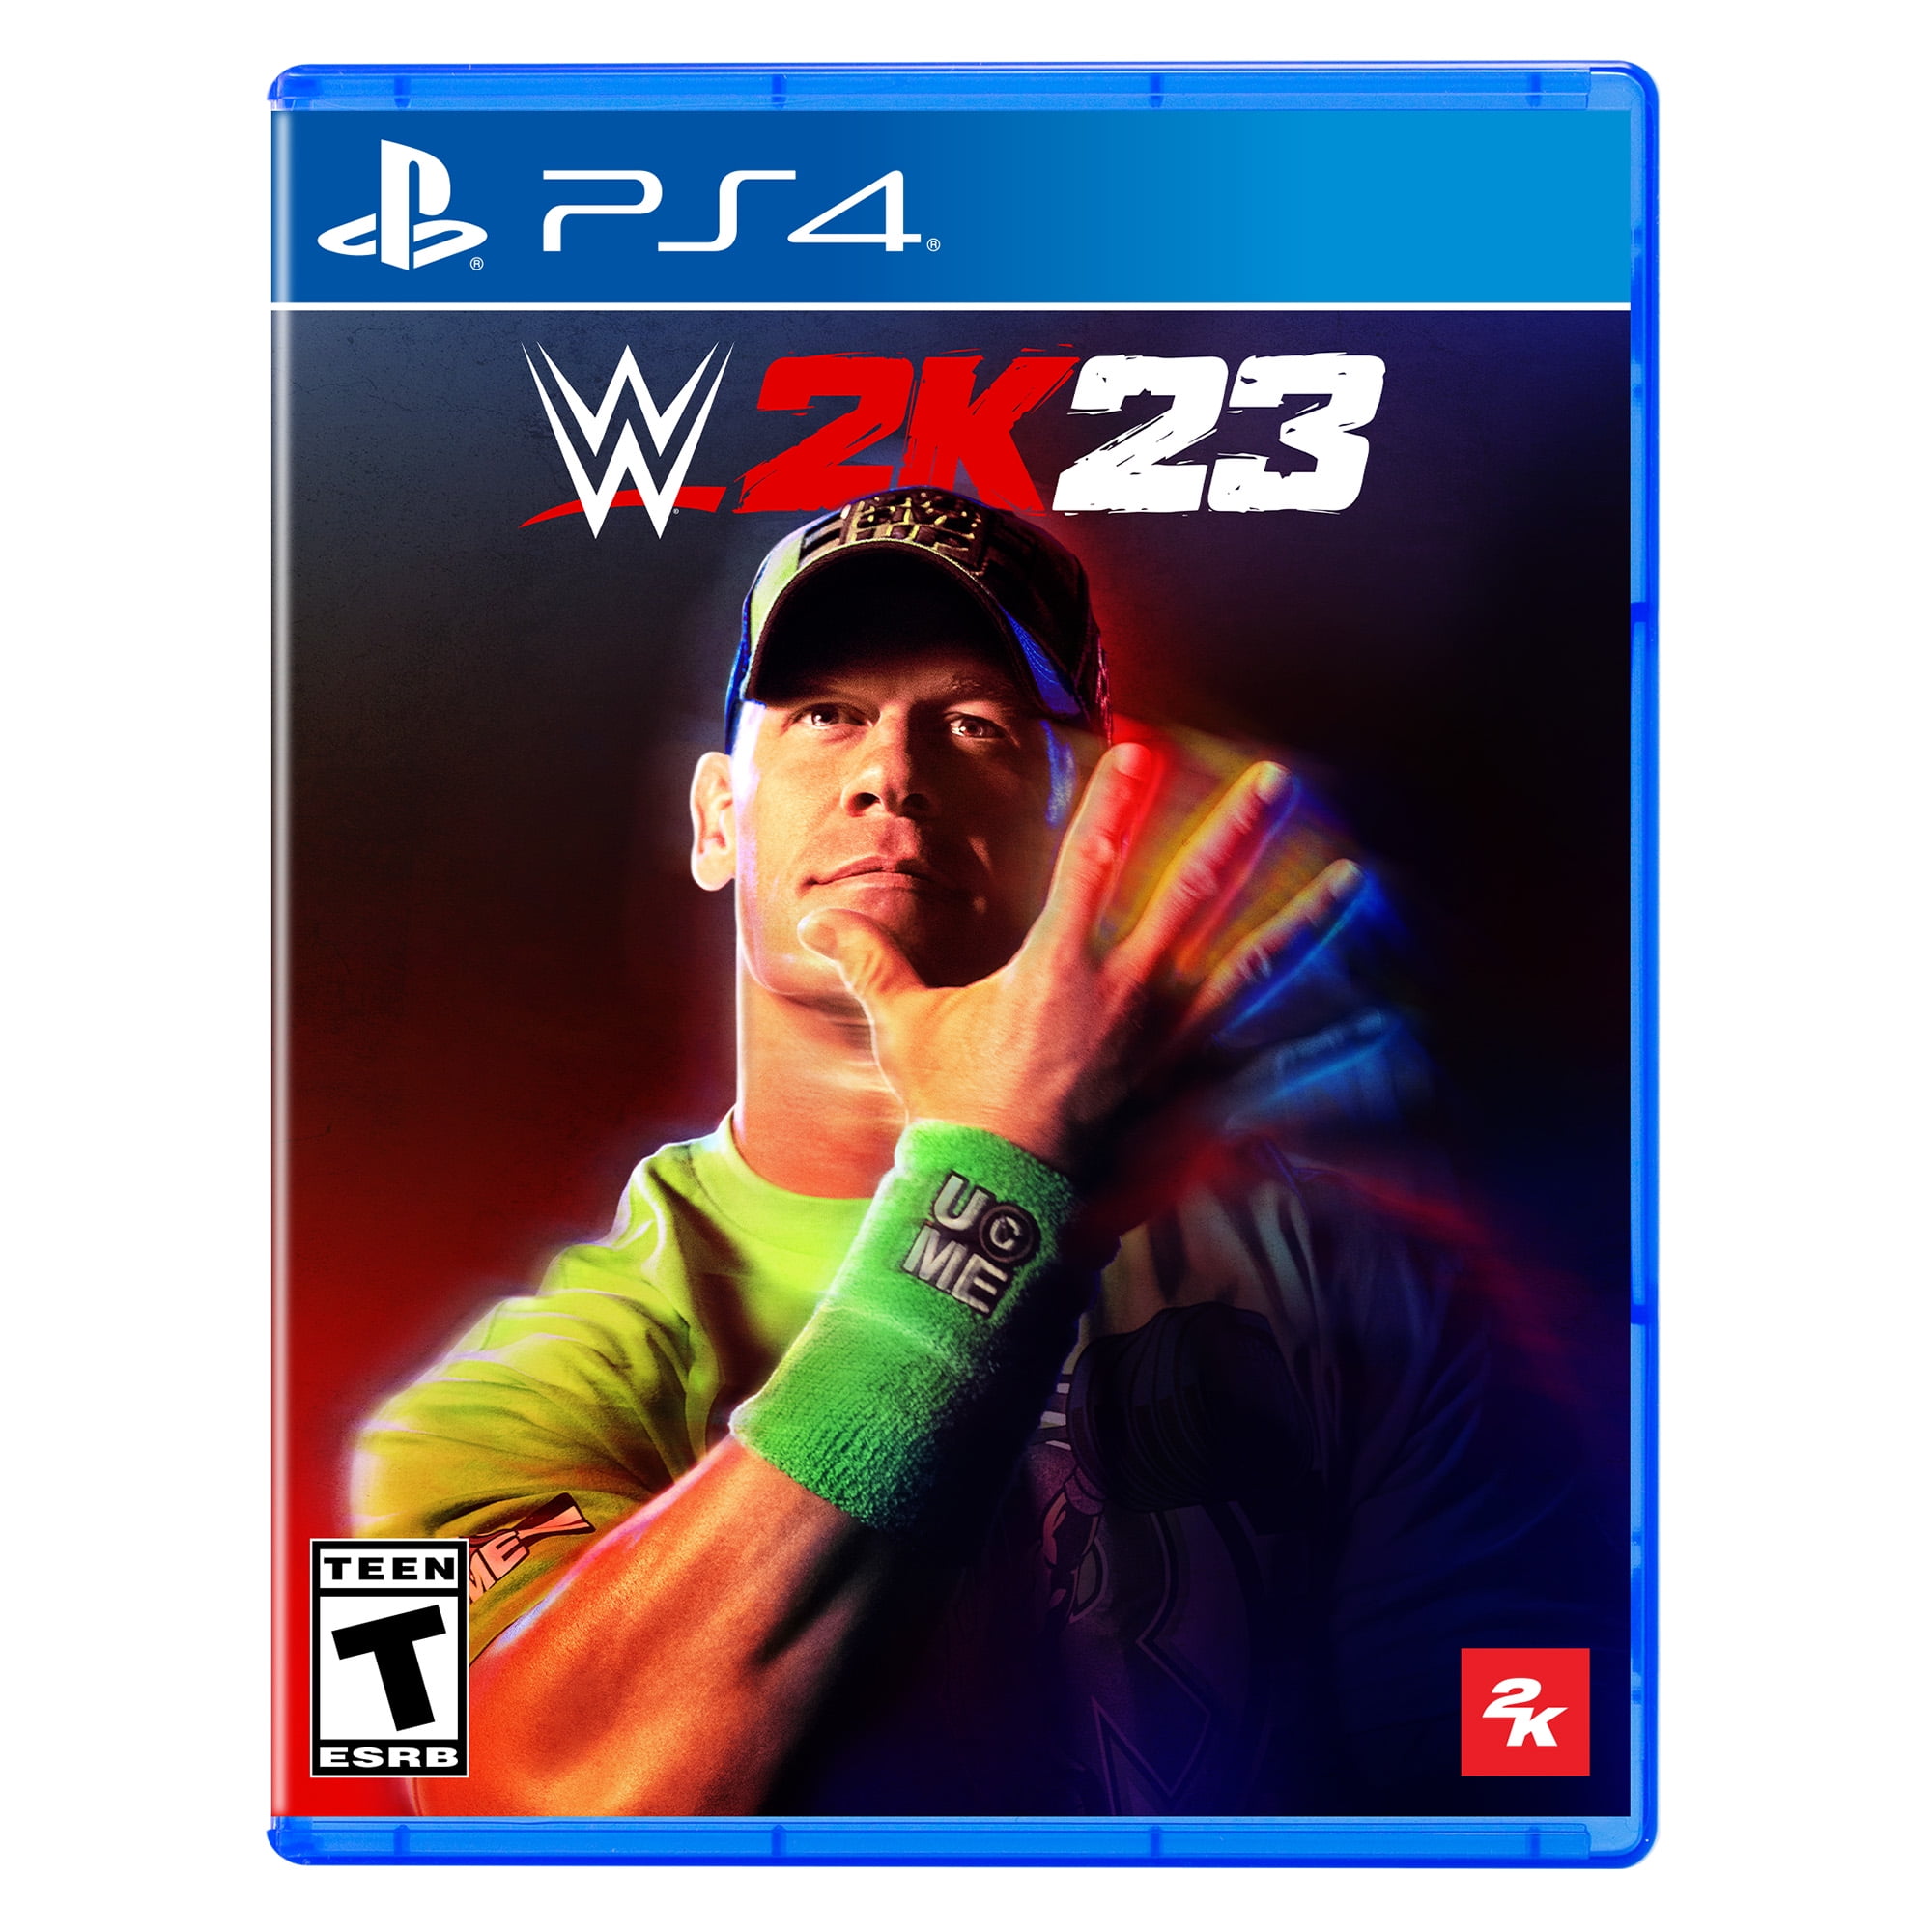 Bad Bunny  WWE 2K23 Roster